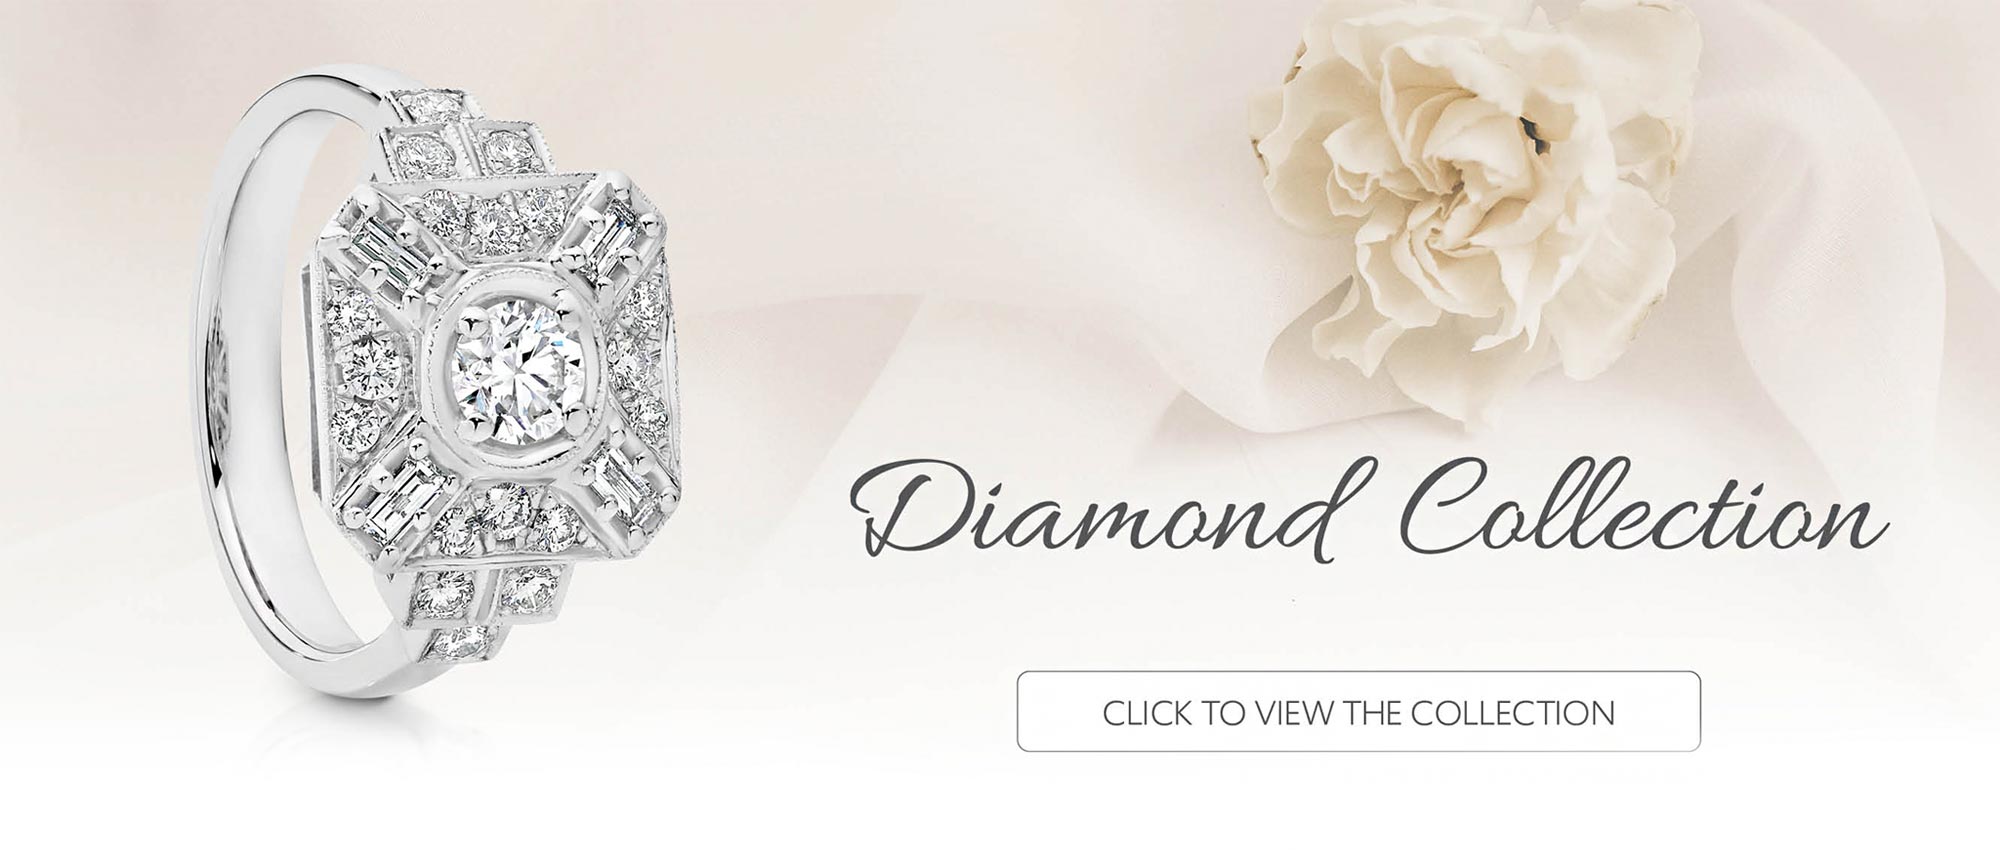 Diamond Collection At Stanthorpe Jewellers